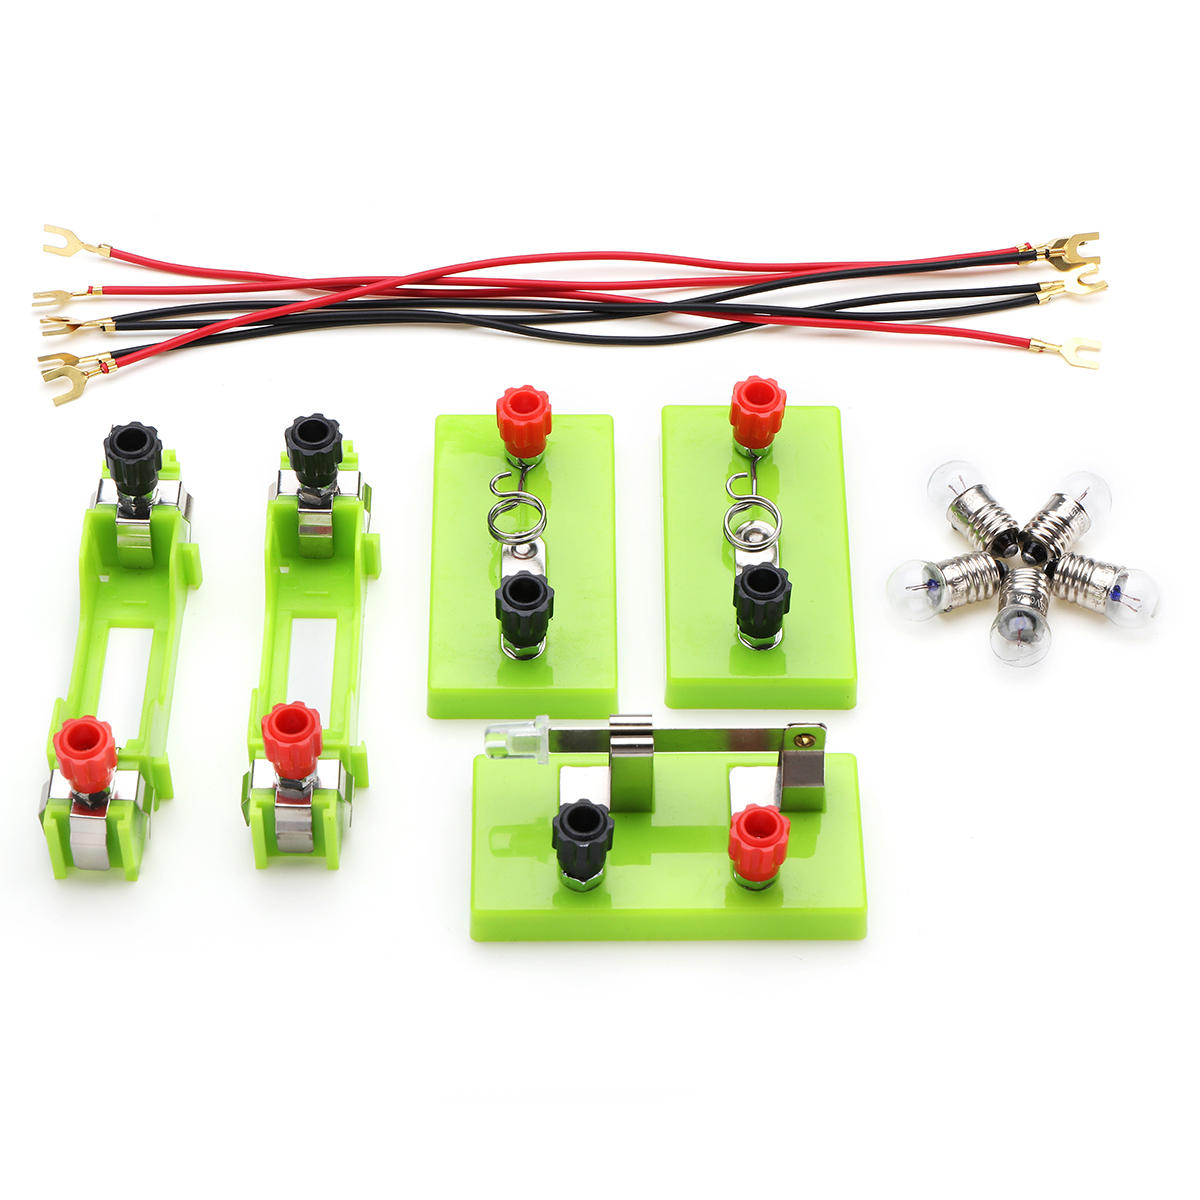 Funny Electric Circuit Kits Children School Science Toy Montessori Learning Physical Experiment Mode